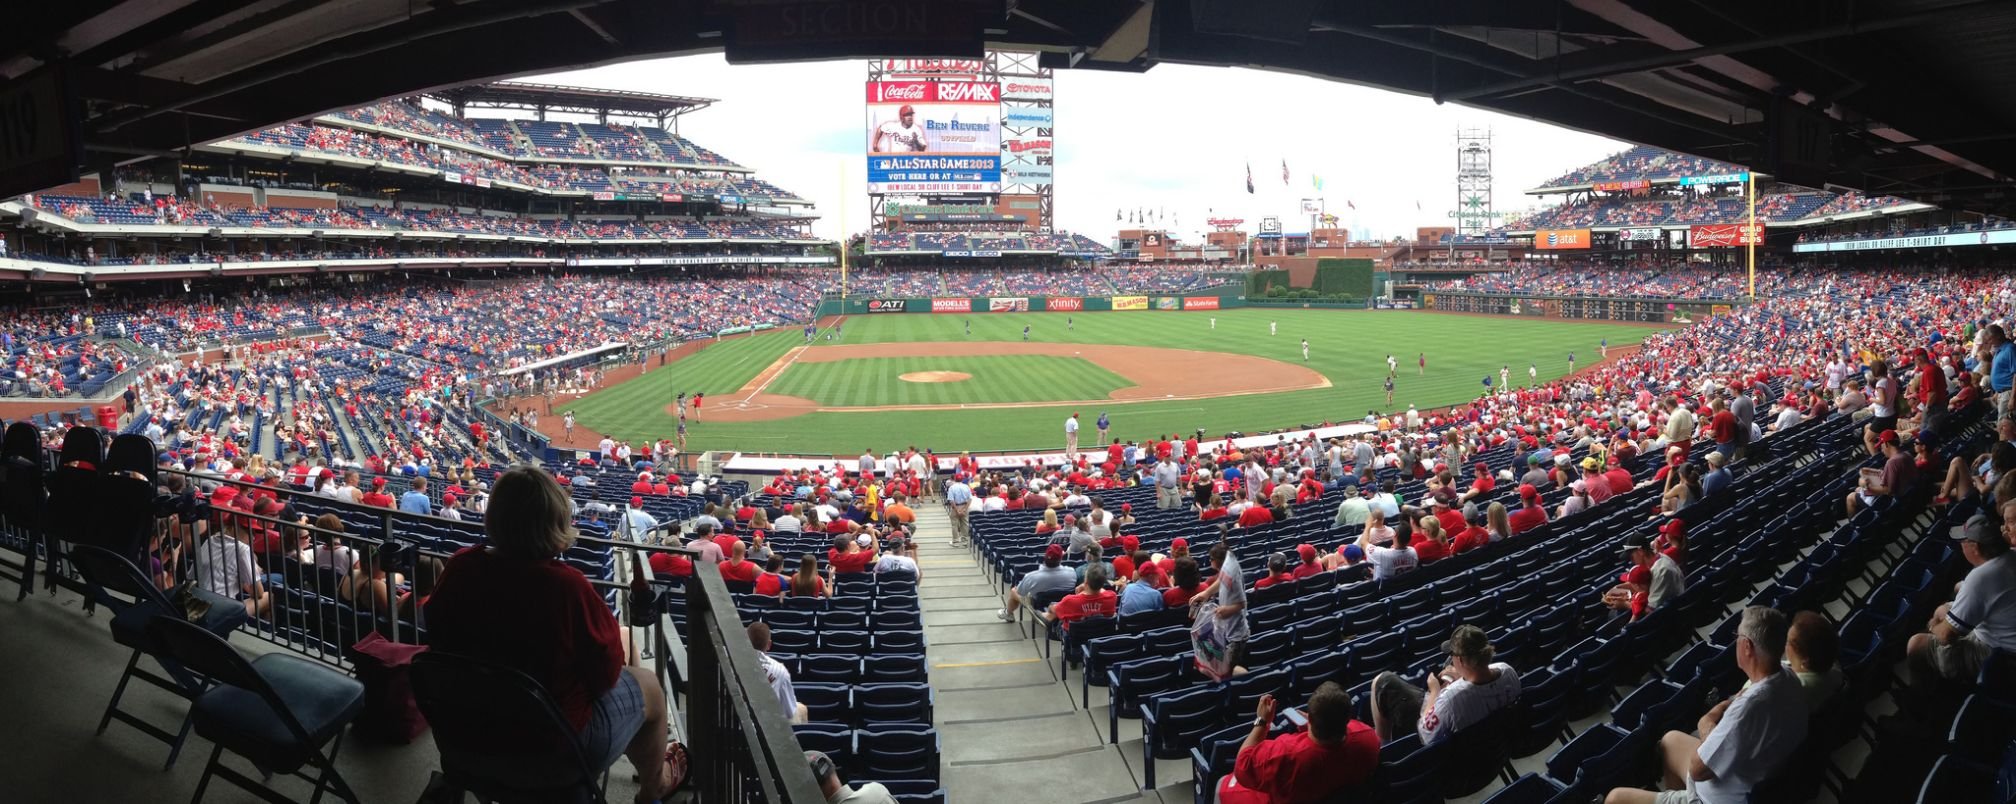 Citizens Bank Park Seating Chart Rows Per Section Two Birds Home